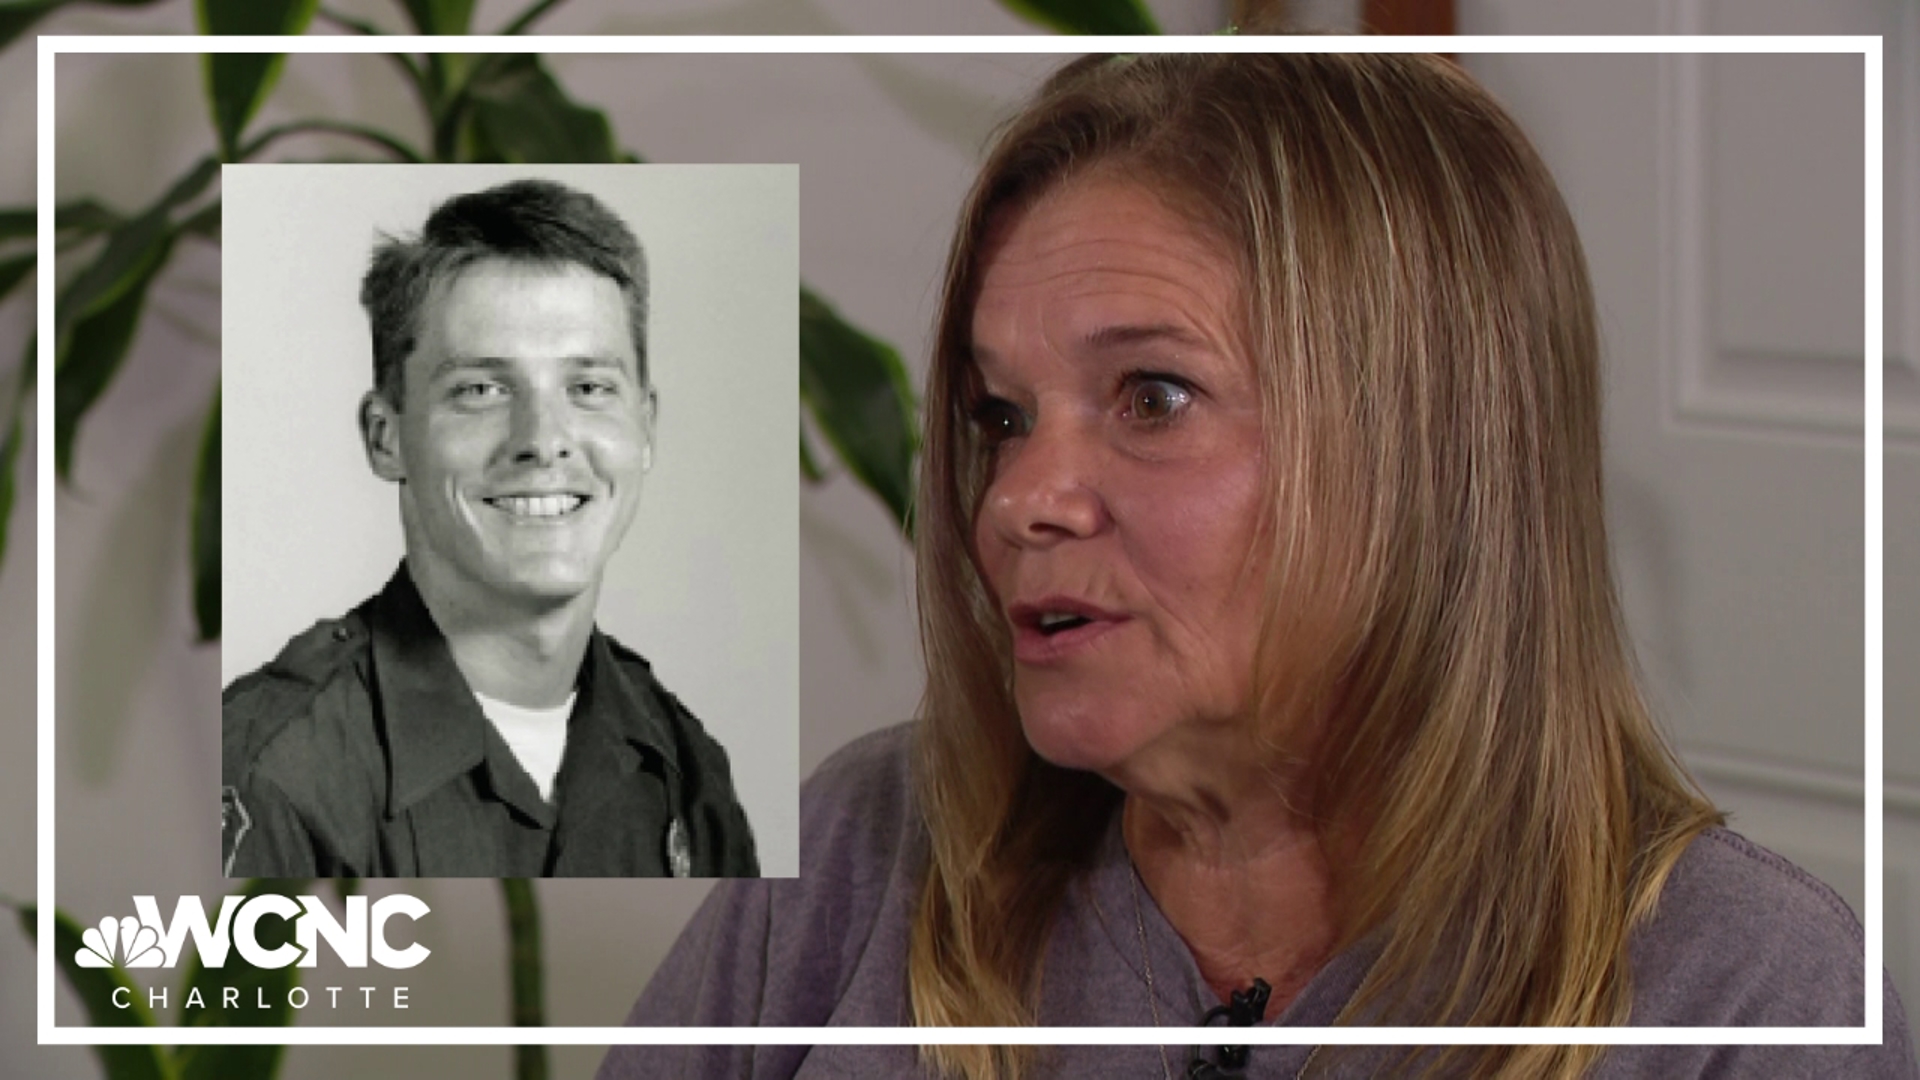 Following the recent deaths of fallen officers, WCNC Charlotte spoke to the sister of fallen officer John Burnette about the impacts it leaves on family and friends.